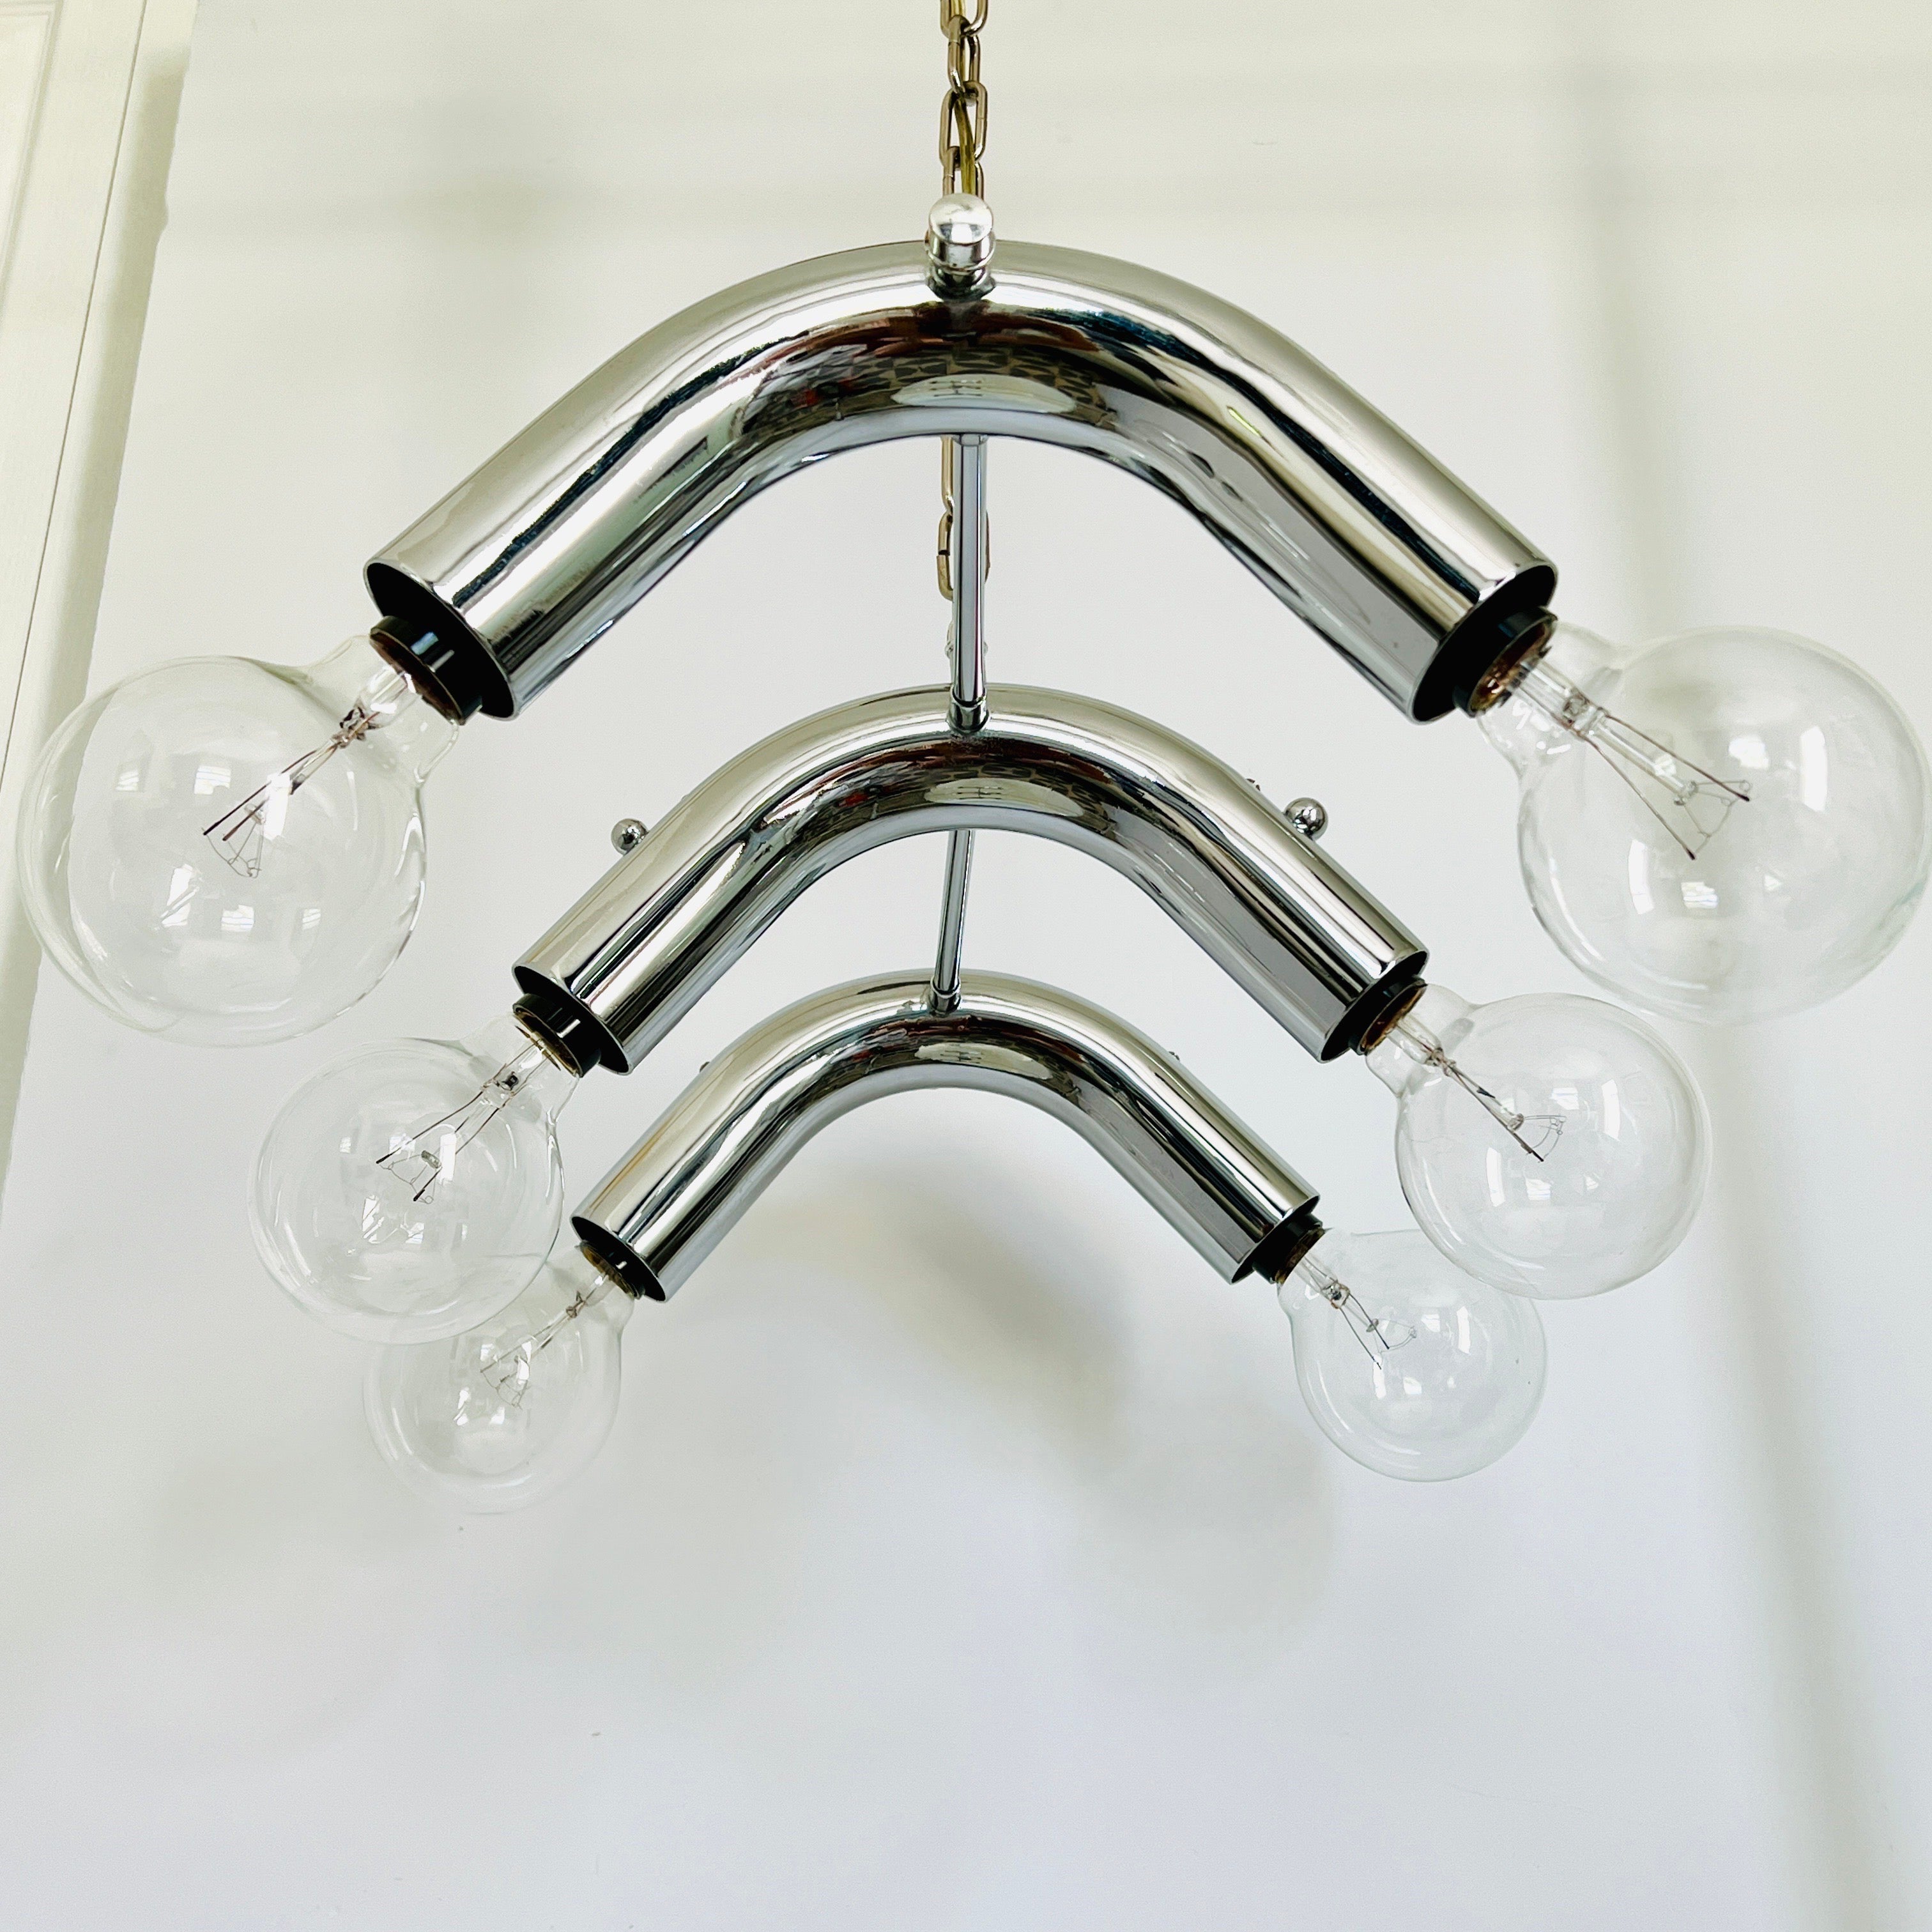 Space Age Tubular Chrome Chandelier by Esperia, Italy, c. 1970's For Sale